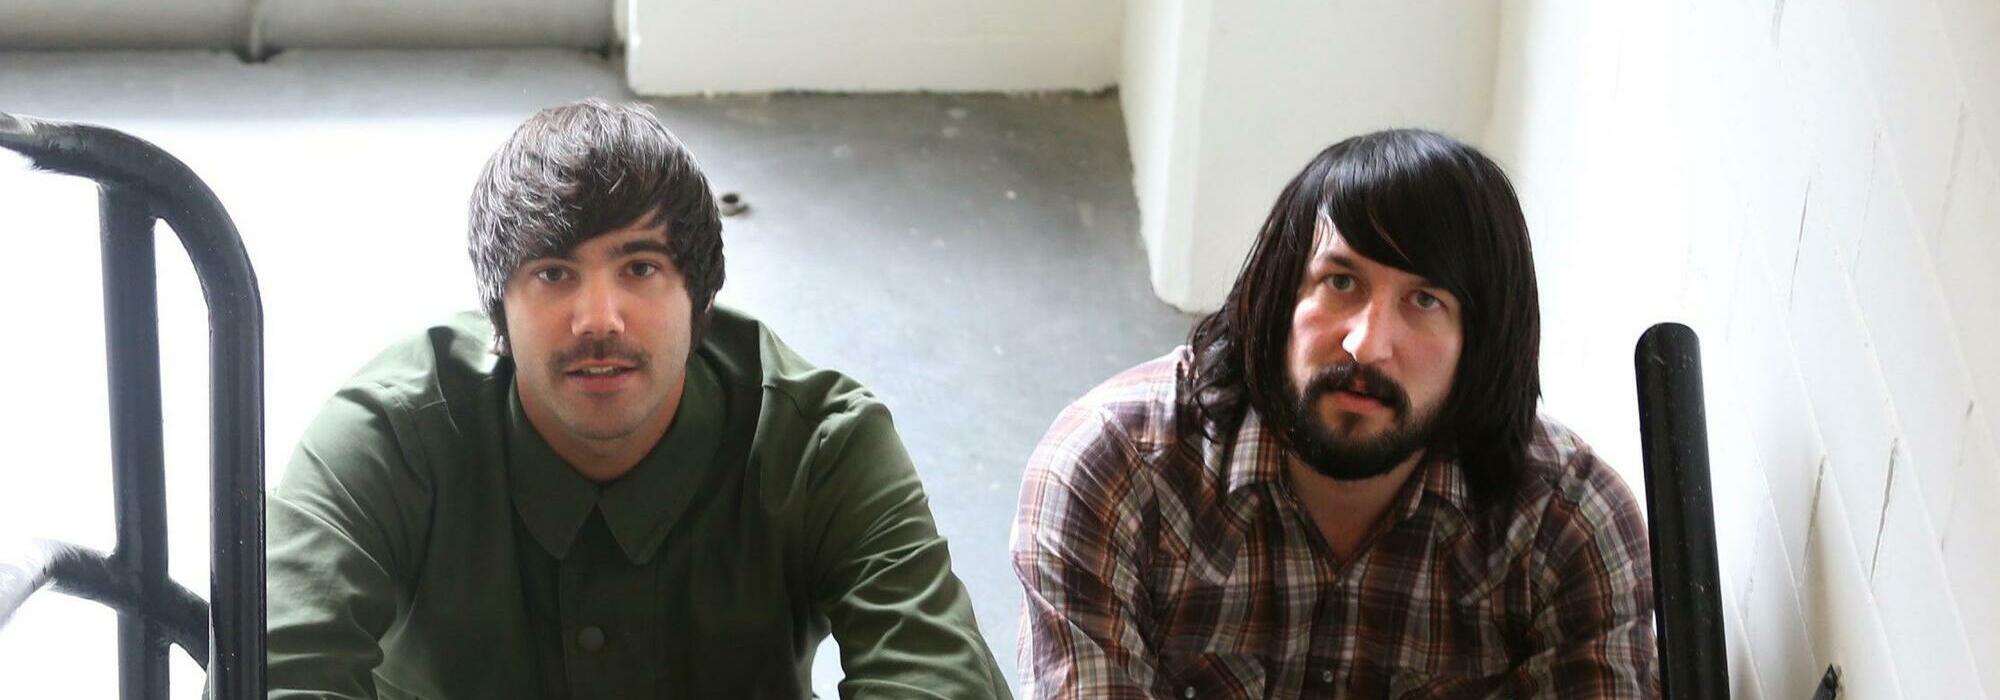 A Death from Above 1979 live event